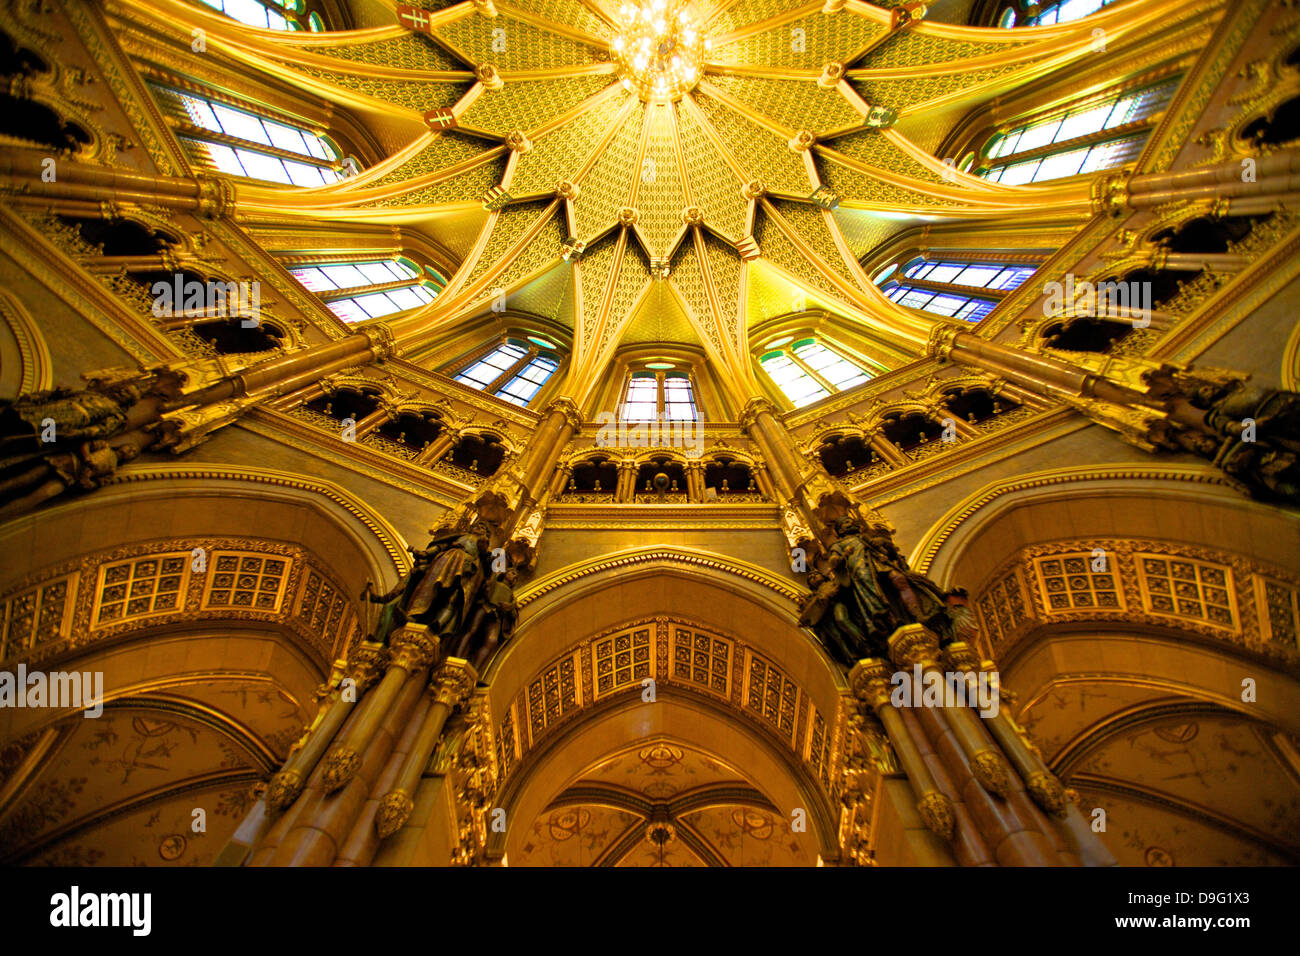 Central Hall ceiling, Hungarian Parliament Building, Budapest, Hungary Stock Photo